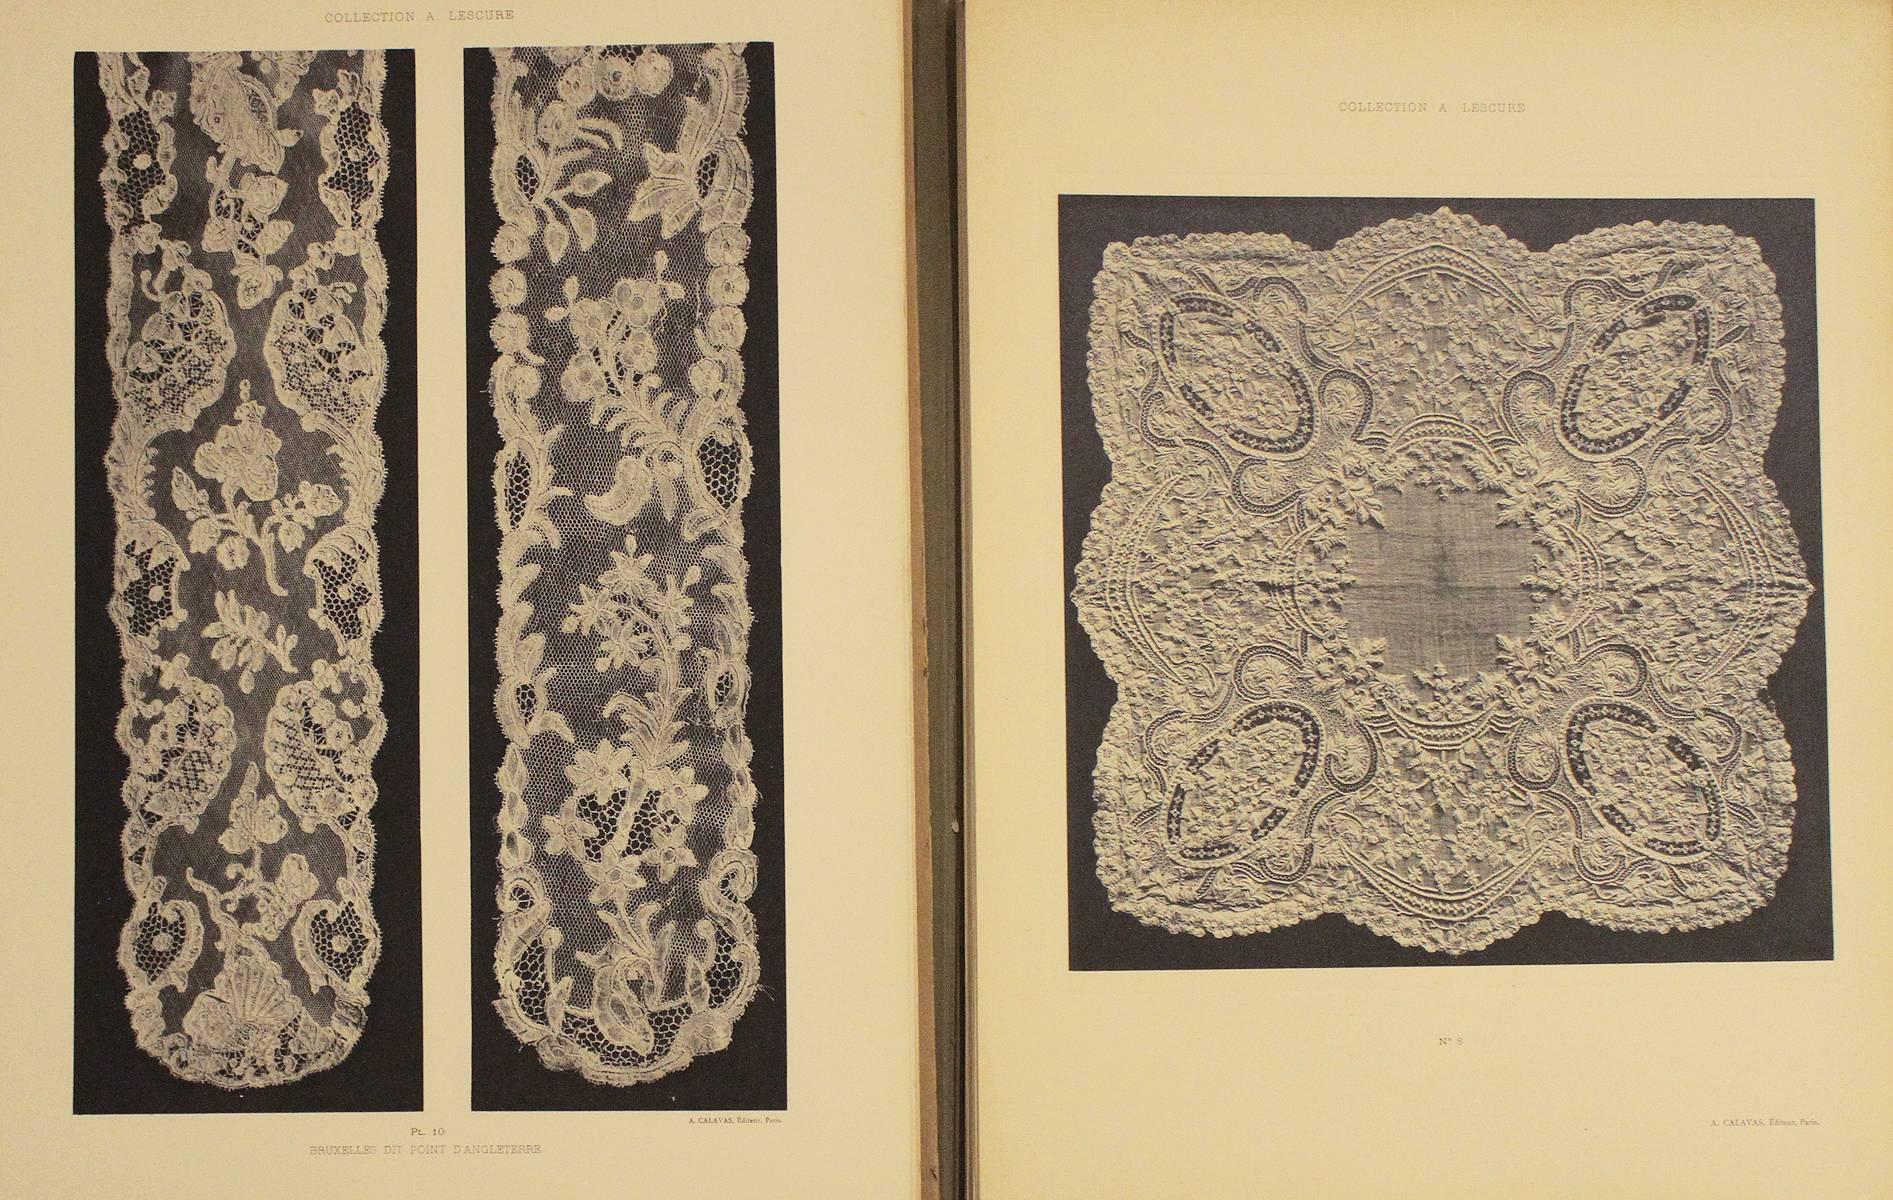 Early 20th Century Collection Lescure Extremely Rare Portfolios About Lace For Sale